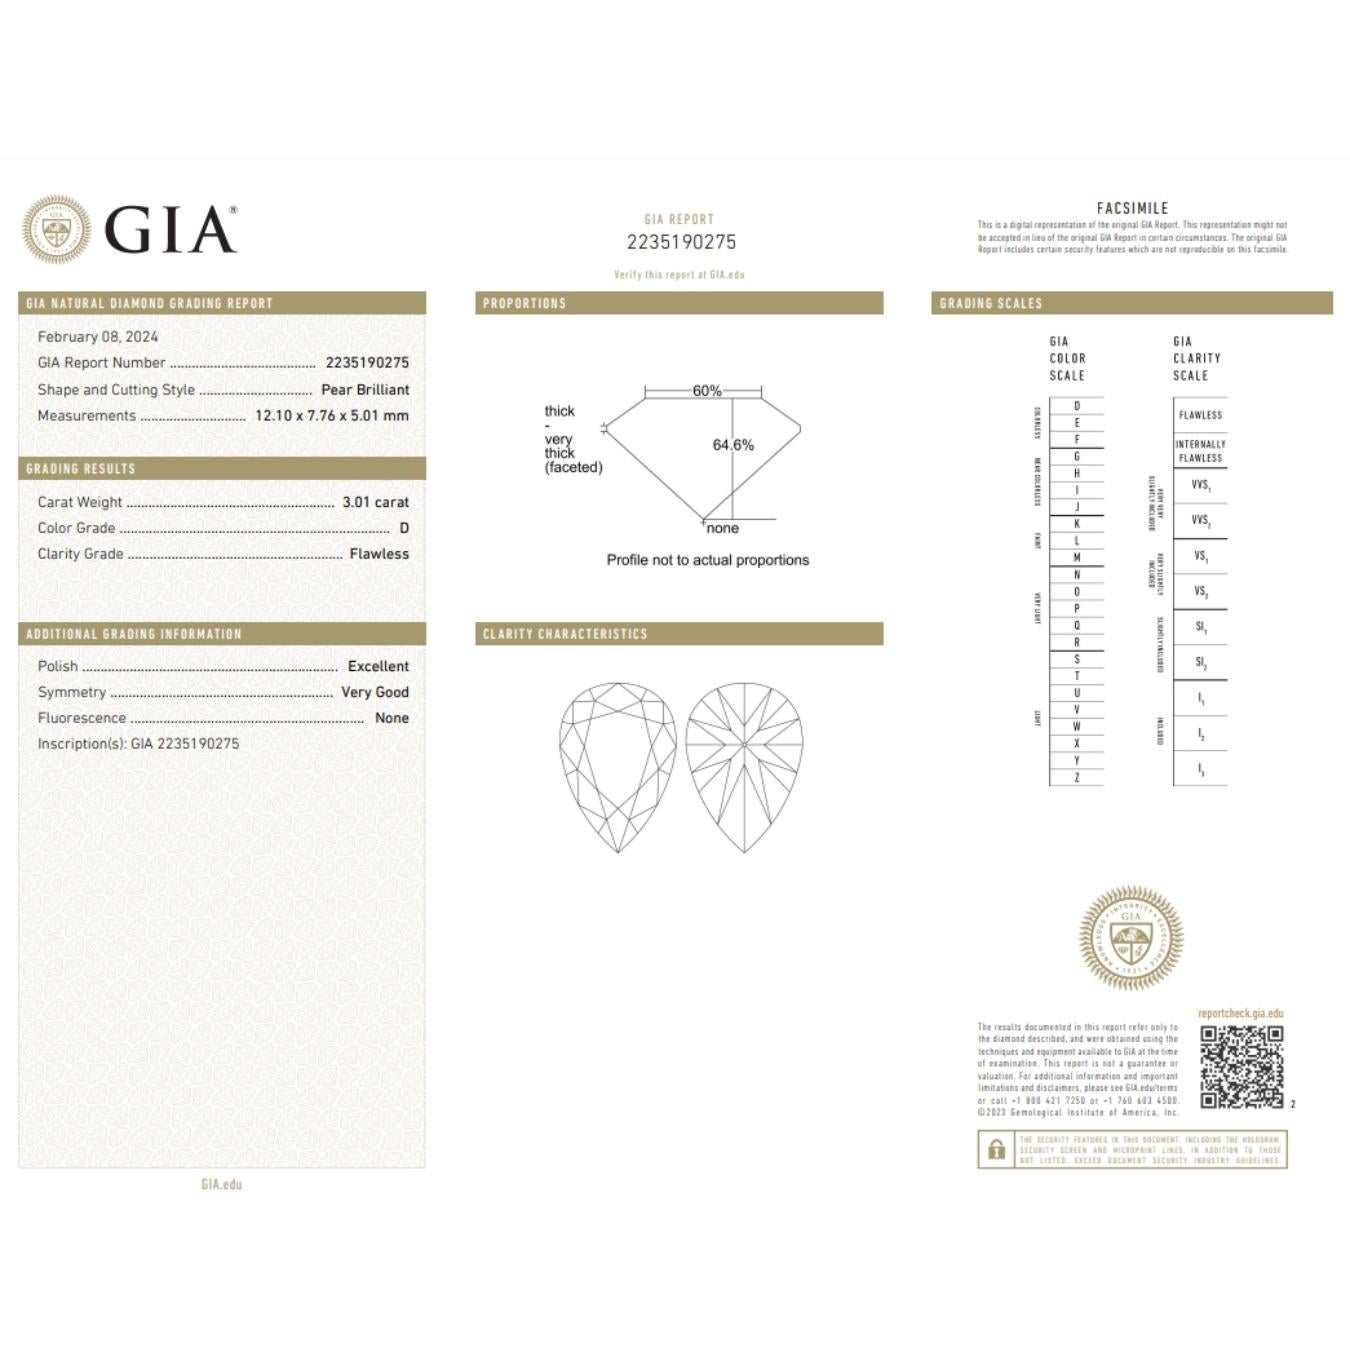 Timeless 1 pc Ideal Cut Natural Diamond w/3.01 ct - GIA Certified

This exceptional 3.01 carat pear-shaped diamond embodies timeless elegance and unrivaled brilliance.  The coveted ideal cut ensures exceptional light performance, maximizing its